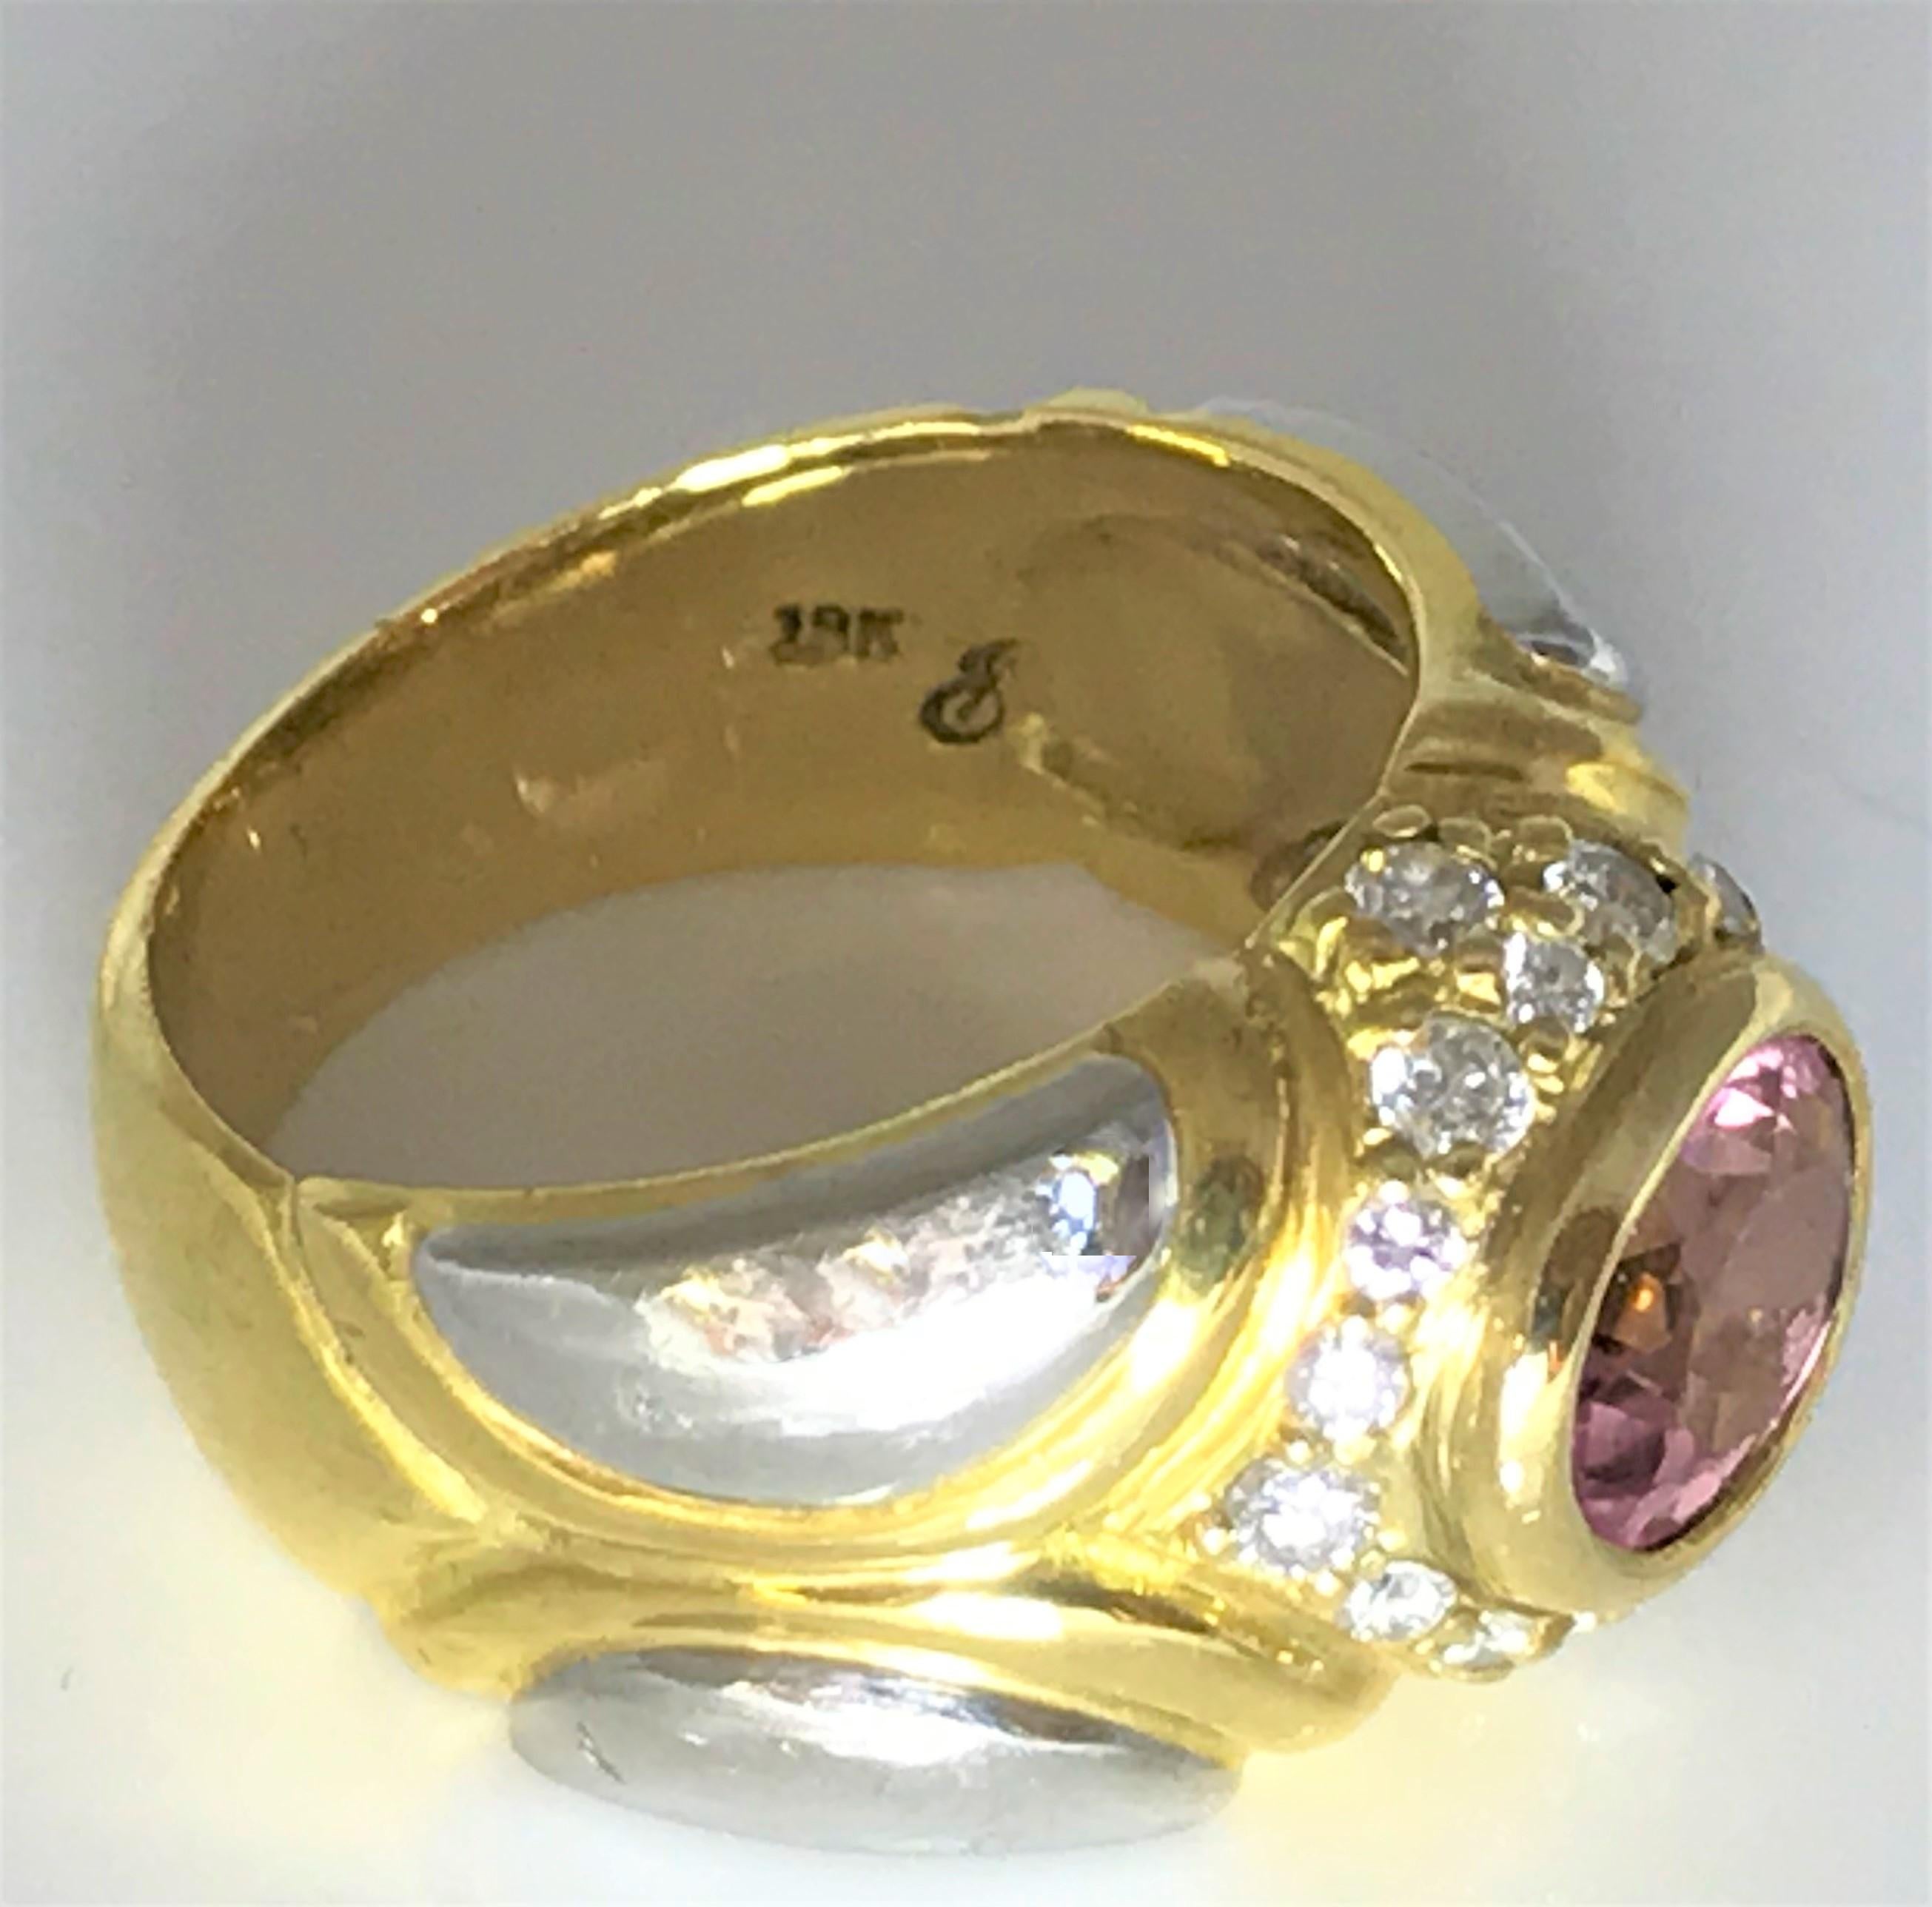 Jody Serago Designer
This beautiful ring will look great on any hand!
18 karat yellow gold and platinum setting 
18 round diamonds, approximately .40tdw
Bezel set oval pink tourmaline approximately 7.5mm x 9.5mm x 4mm
Stamped 